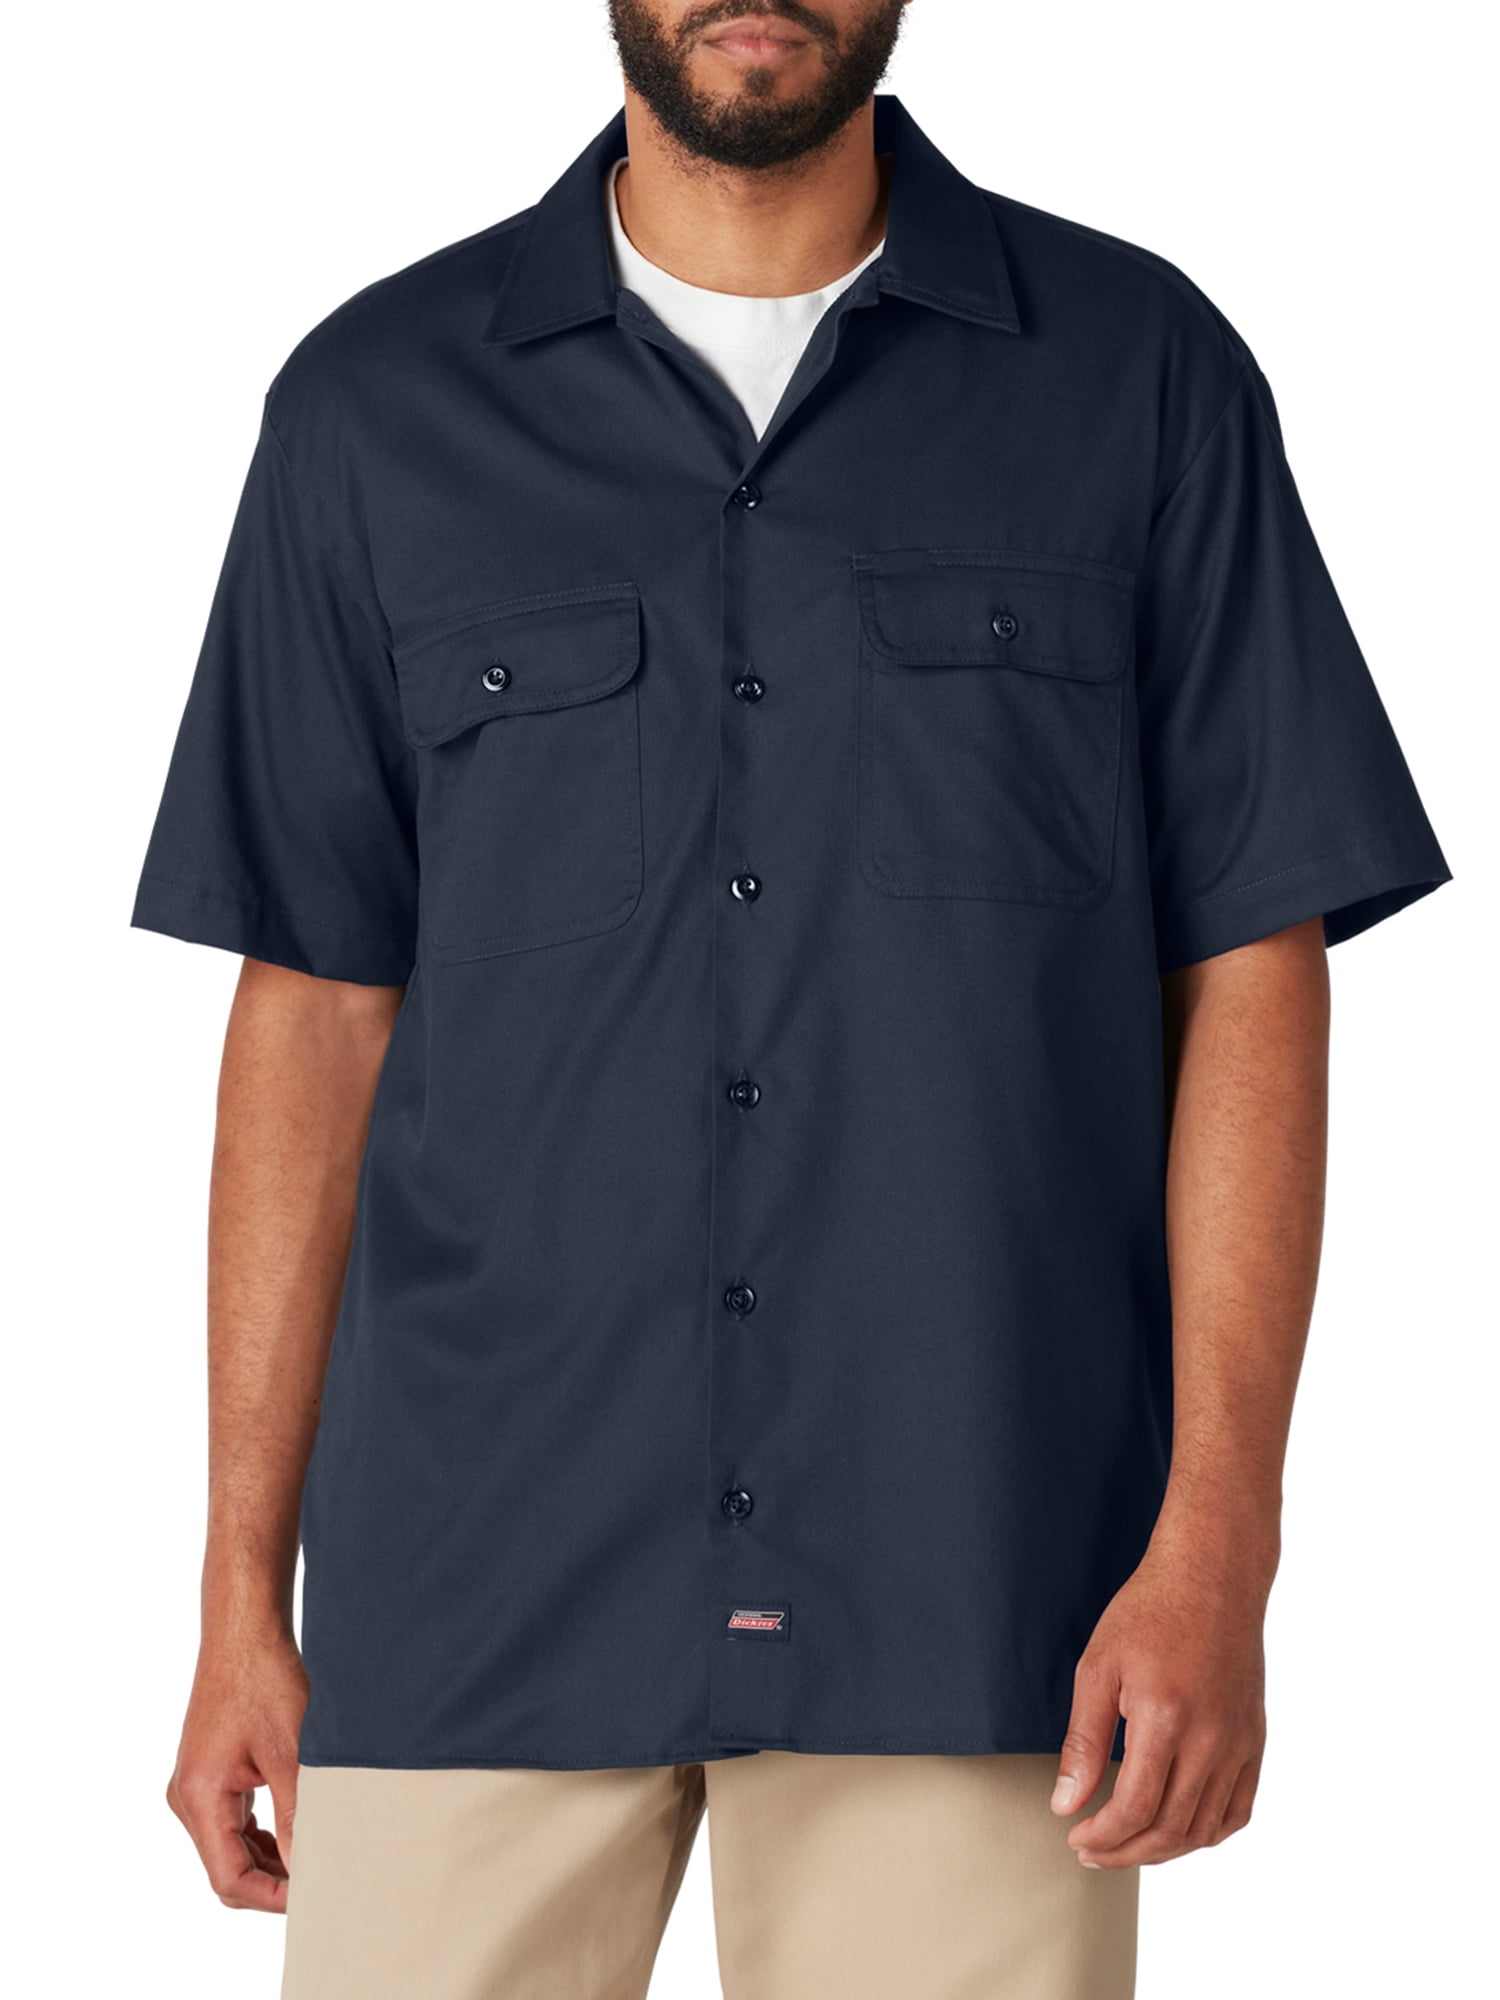 Genuine Dickies Relaxed Fit Short Sleeve Collared Cotton Polyester Work  Shirt (Men's), 1 Count, 1 Pack 